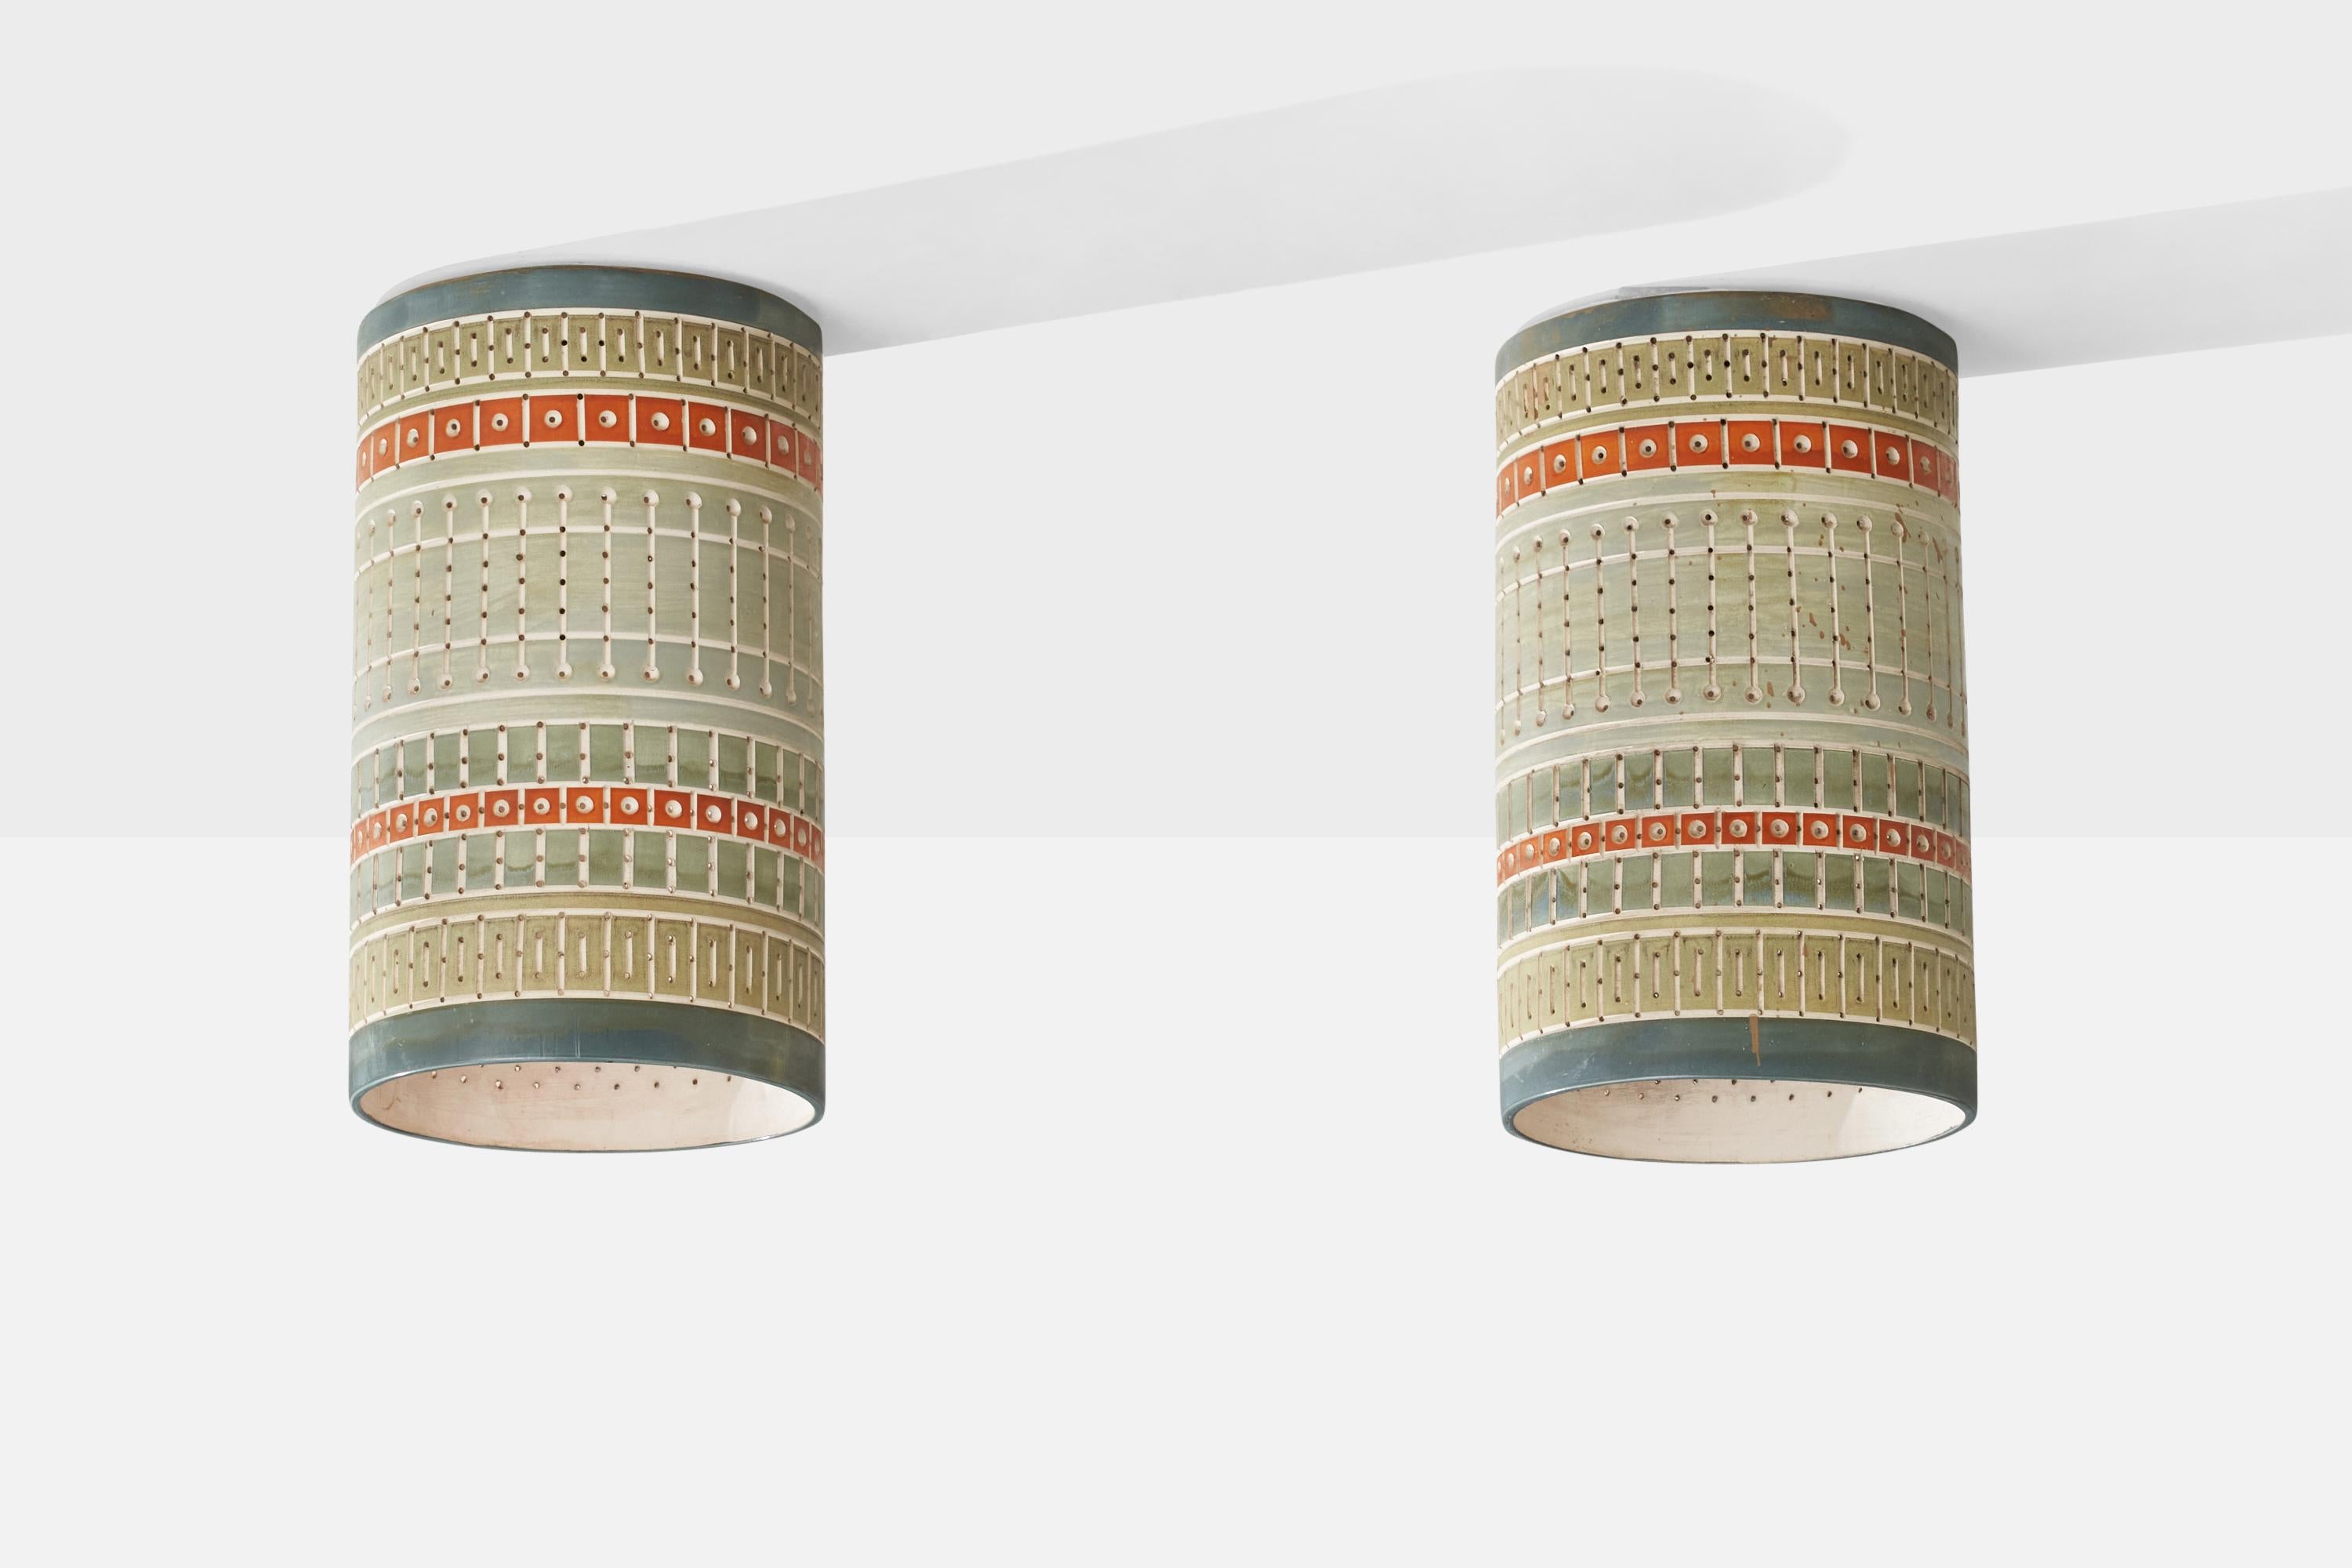 A pair of hand-painted yellow, red and green blue ceramic flush mounts or pendant lights, designed and produced by Martha & Beaumont Mood, San Antonio, Texas, USA, 1970s 

Overall Dimensions (inches): 18.25H x 10.75” D
Back Plate Dimensions